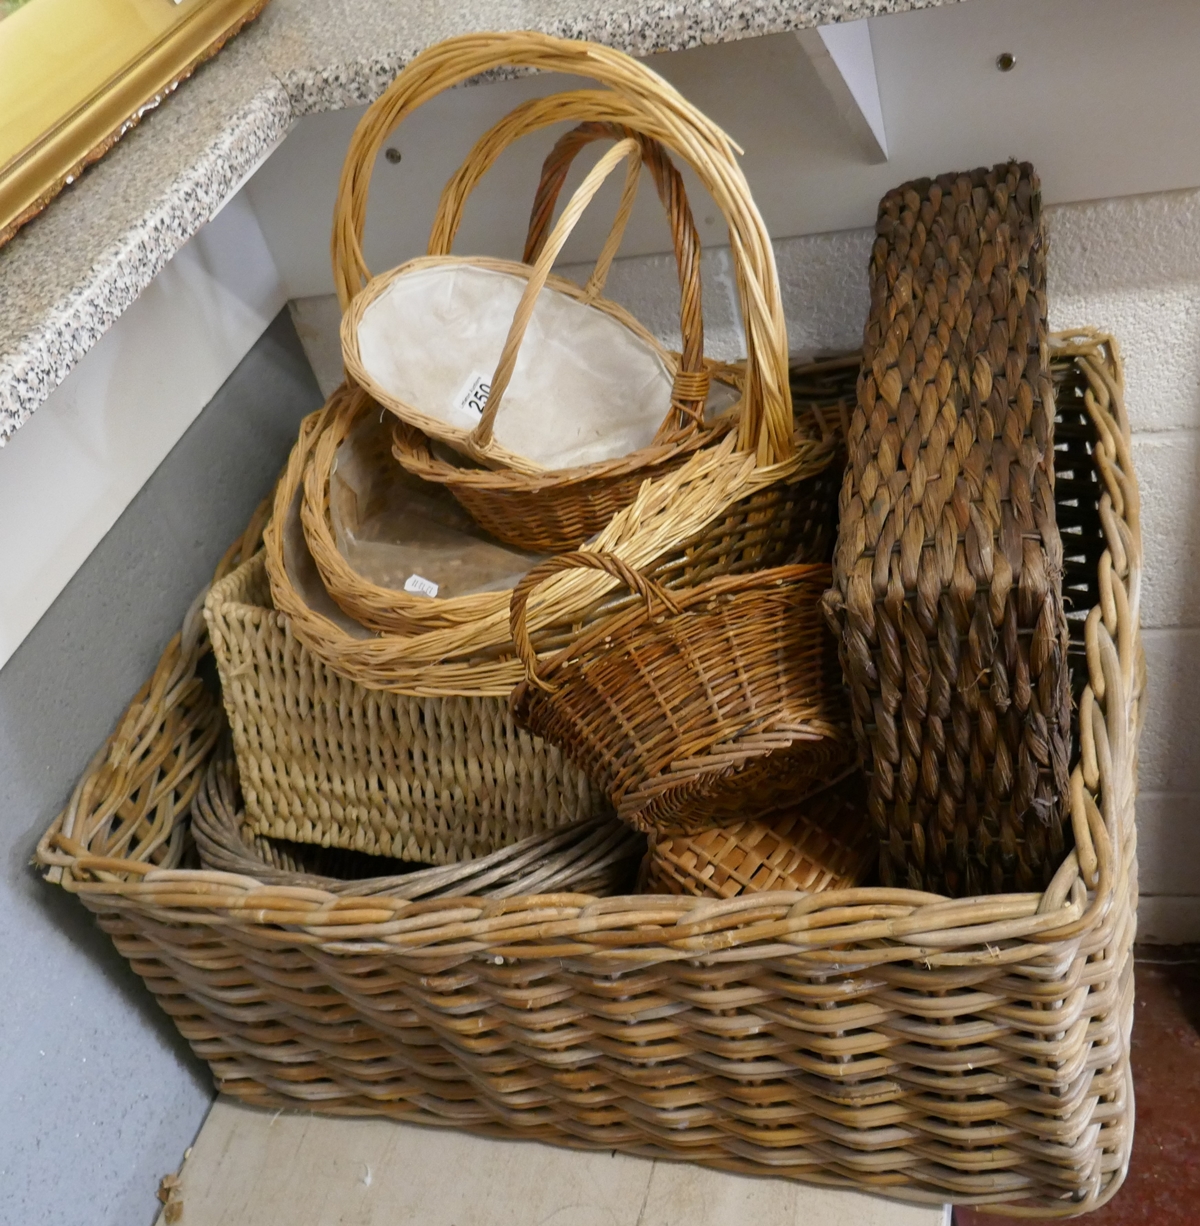 Collection of wicker baskets